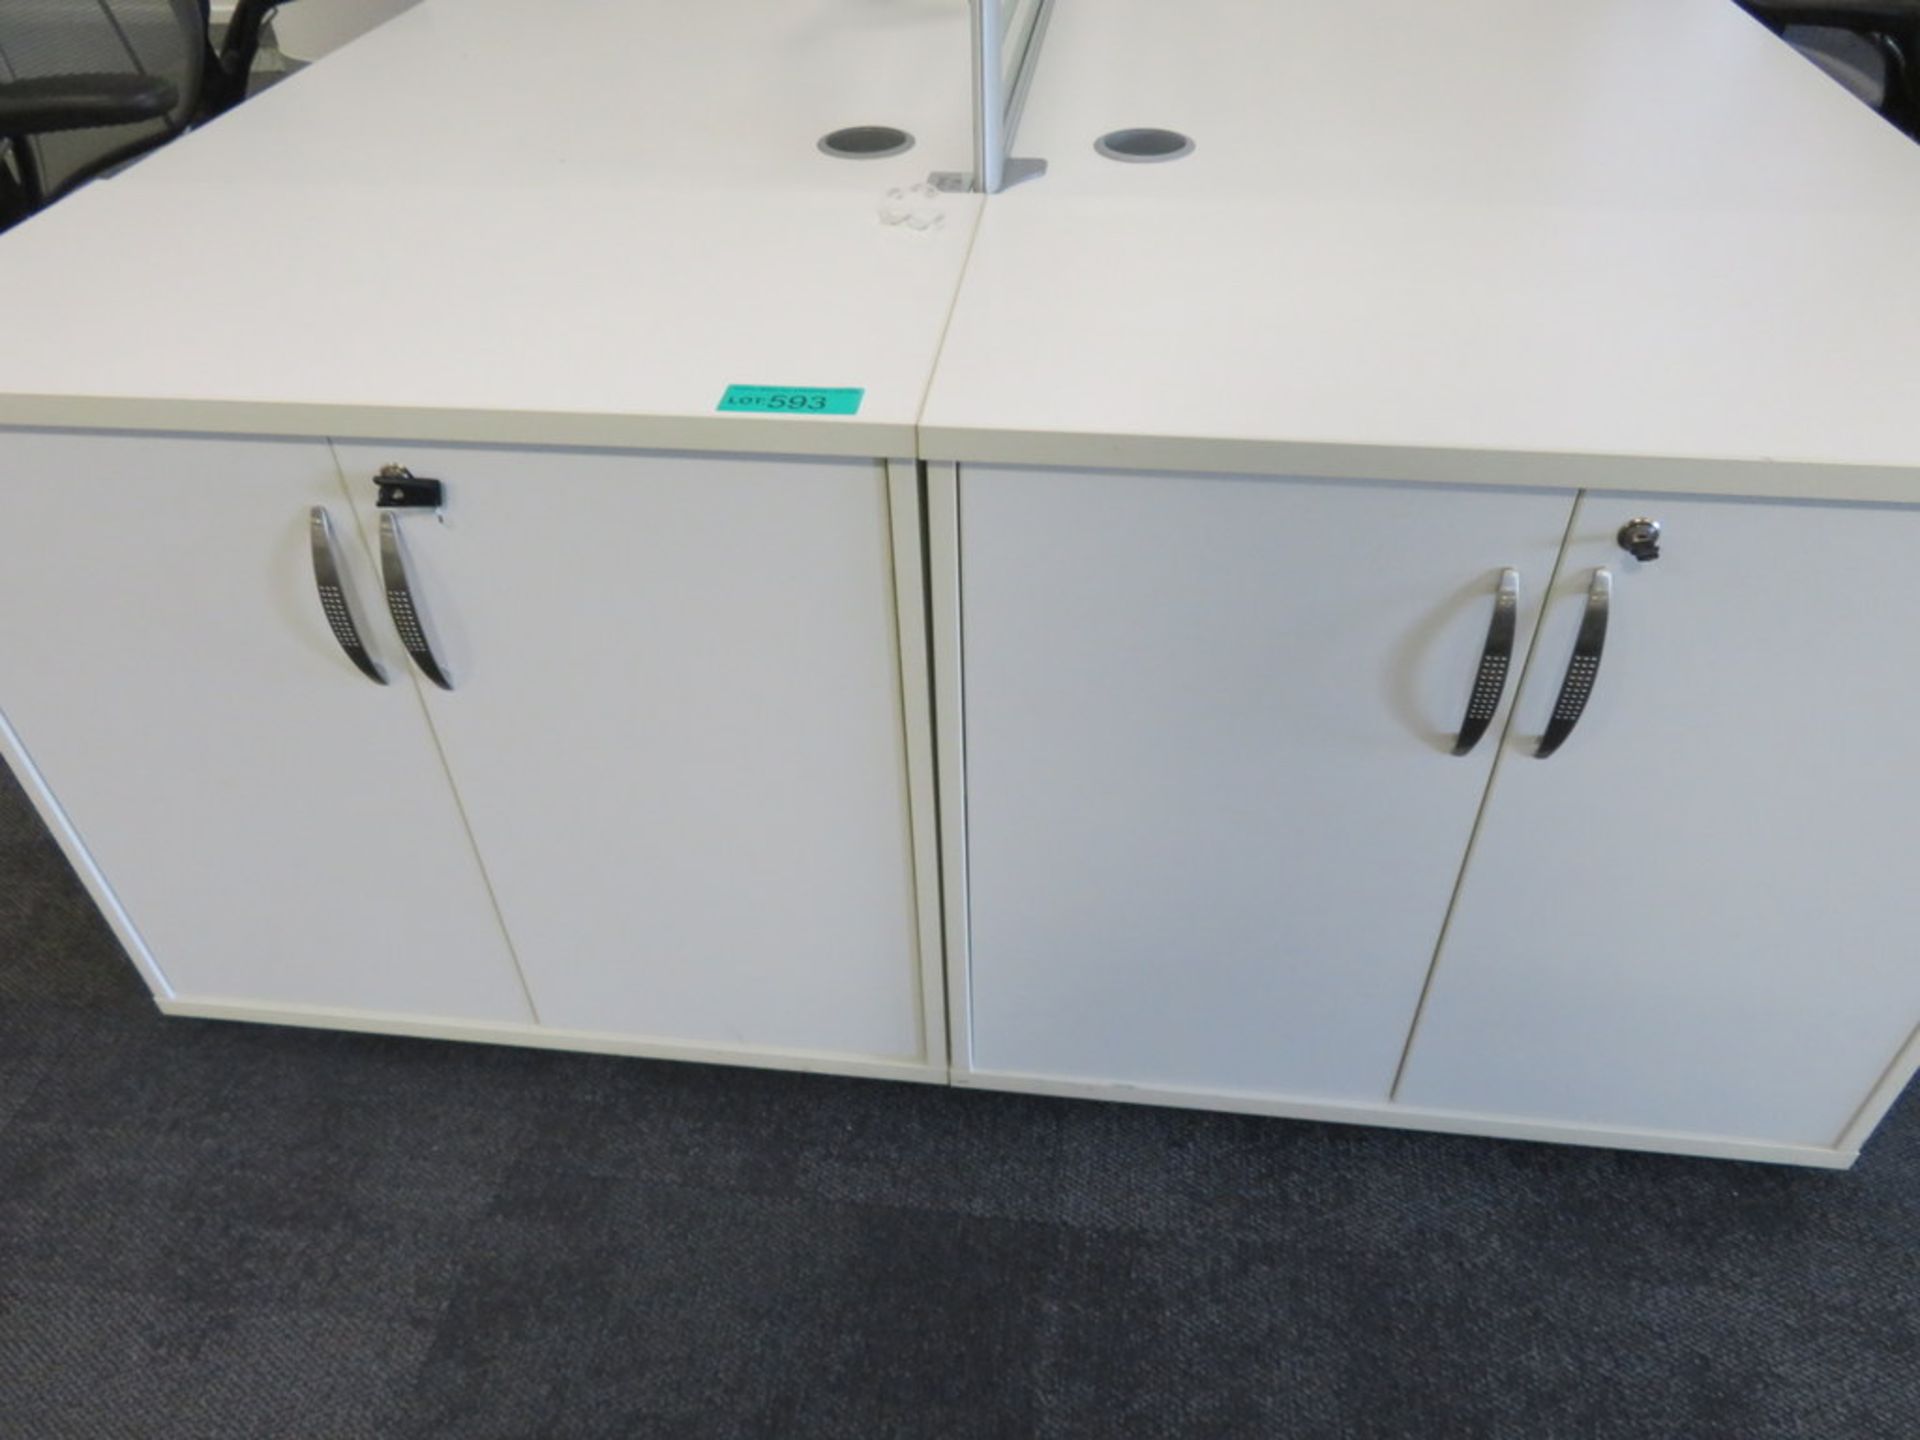 6 Person Desk Arrangement With Dividers, Monitor Arms & Storage Cupboards. Chairs Are Not Included. - Image 3 of 4